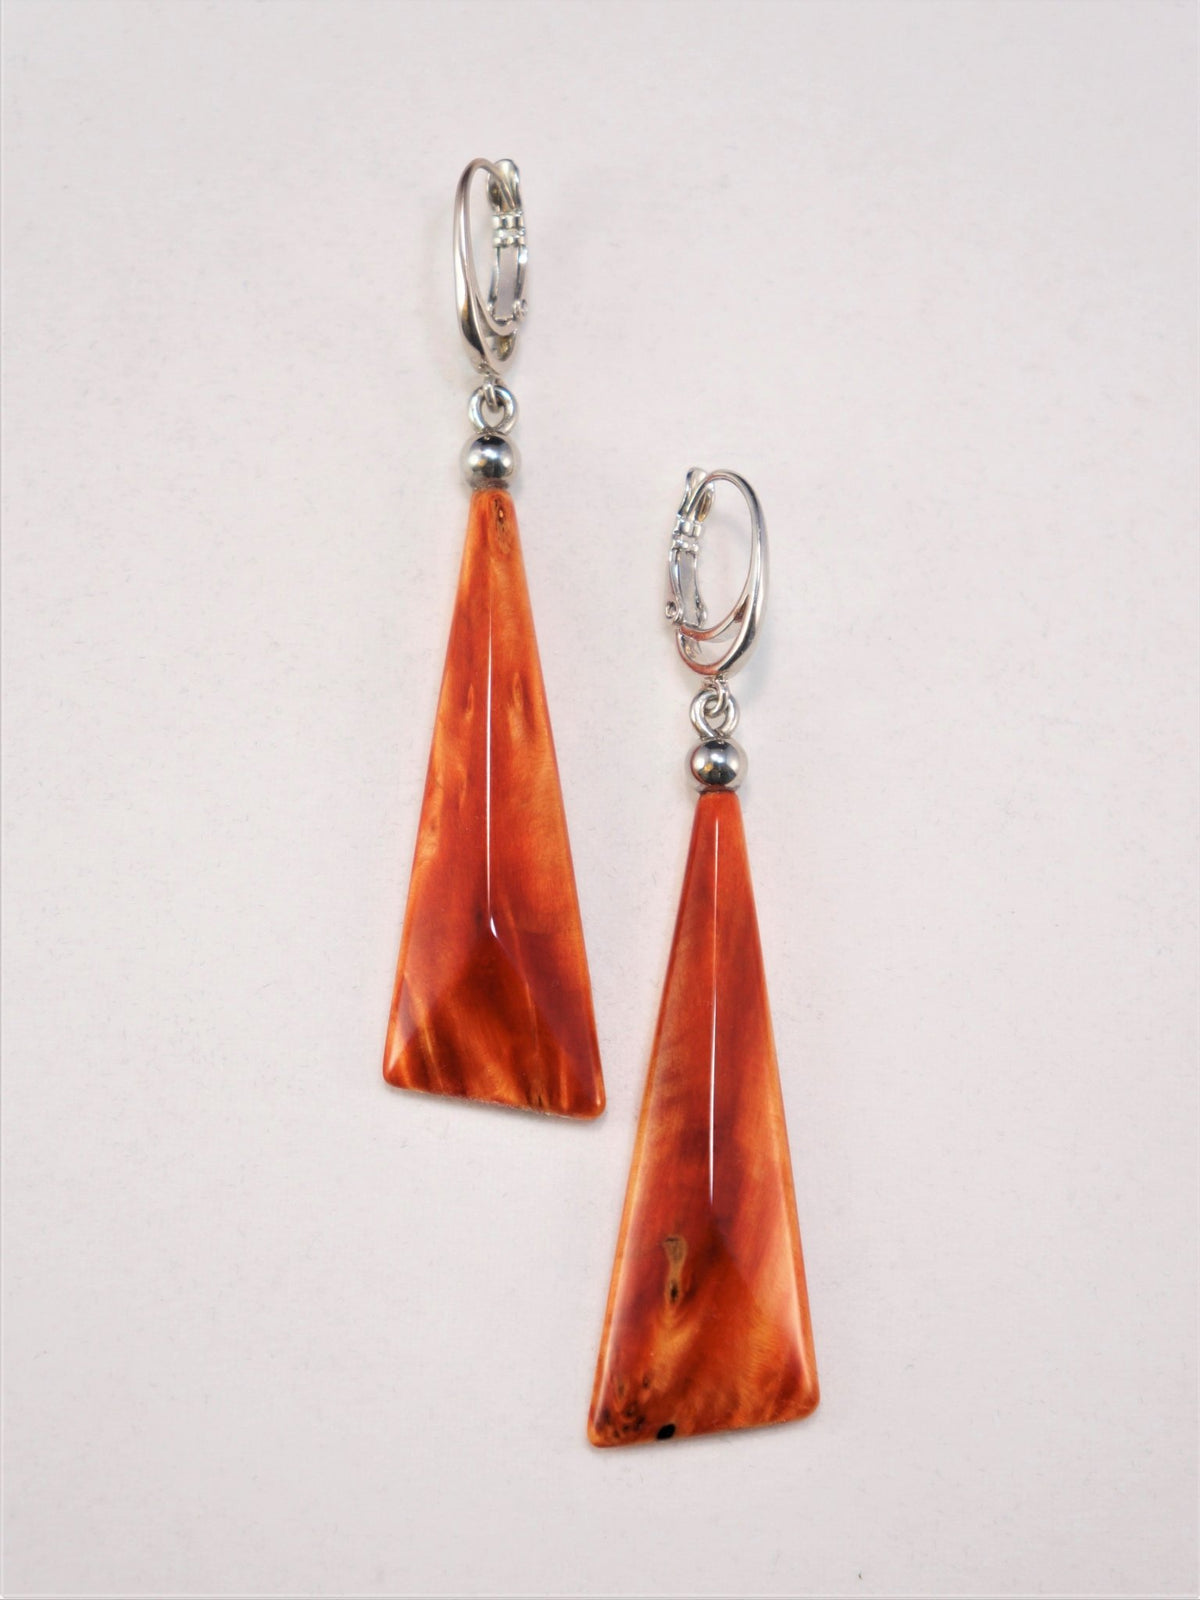 Stabilized and Dyed Maple Burl wood Earrings